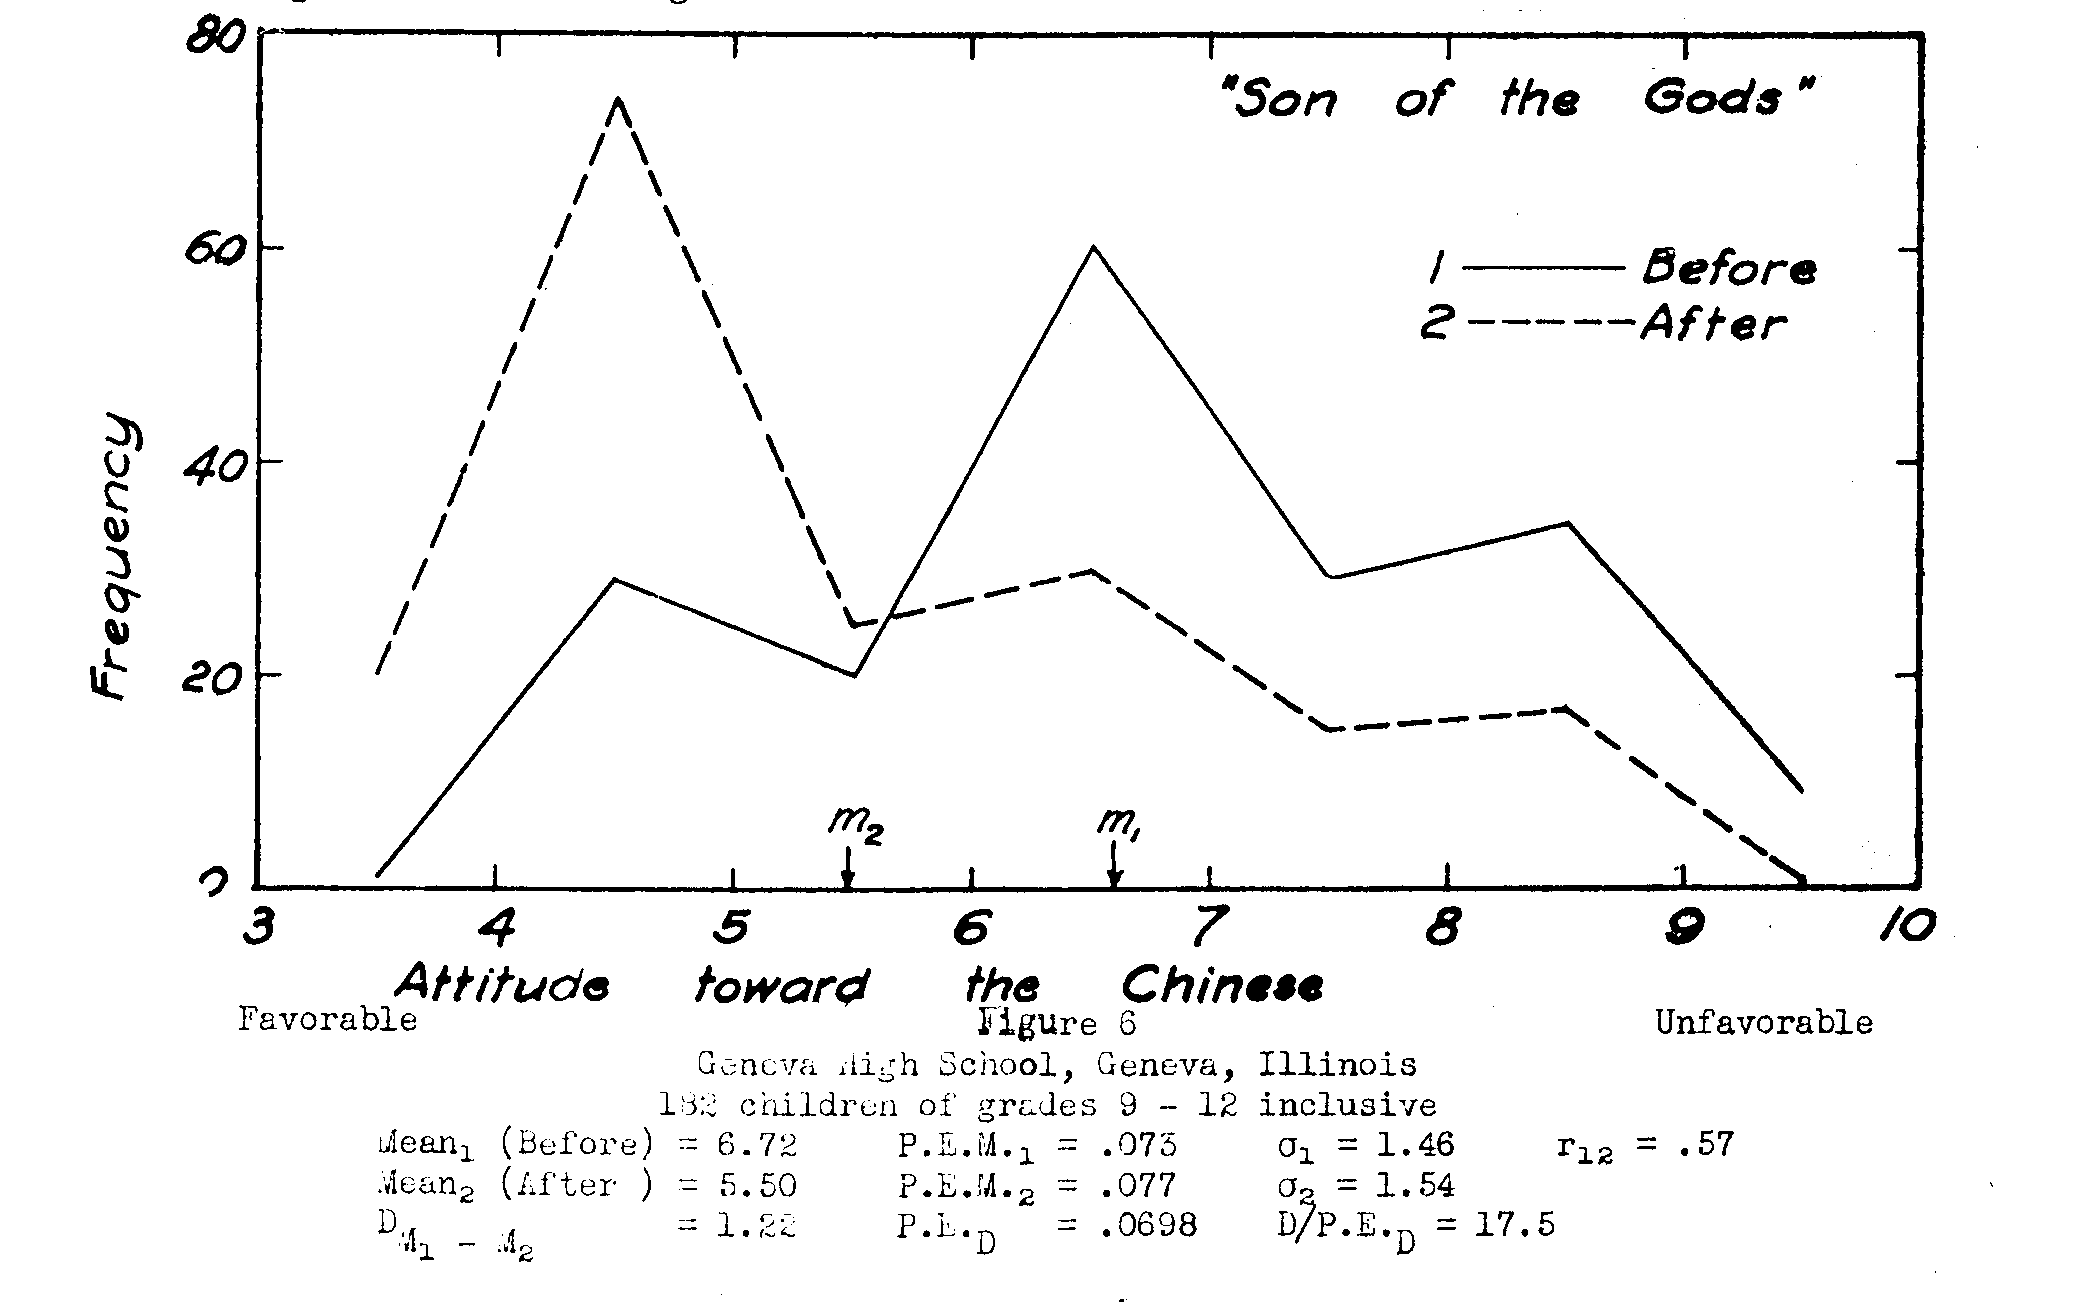 Figure 8, Attitude toward Chinese, before and after SON OF THE GODS